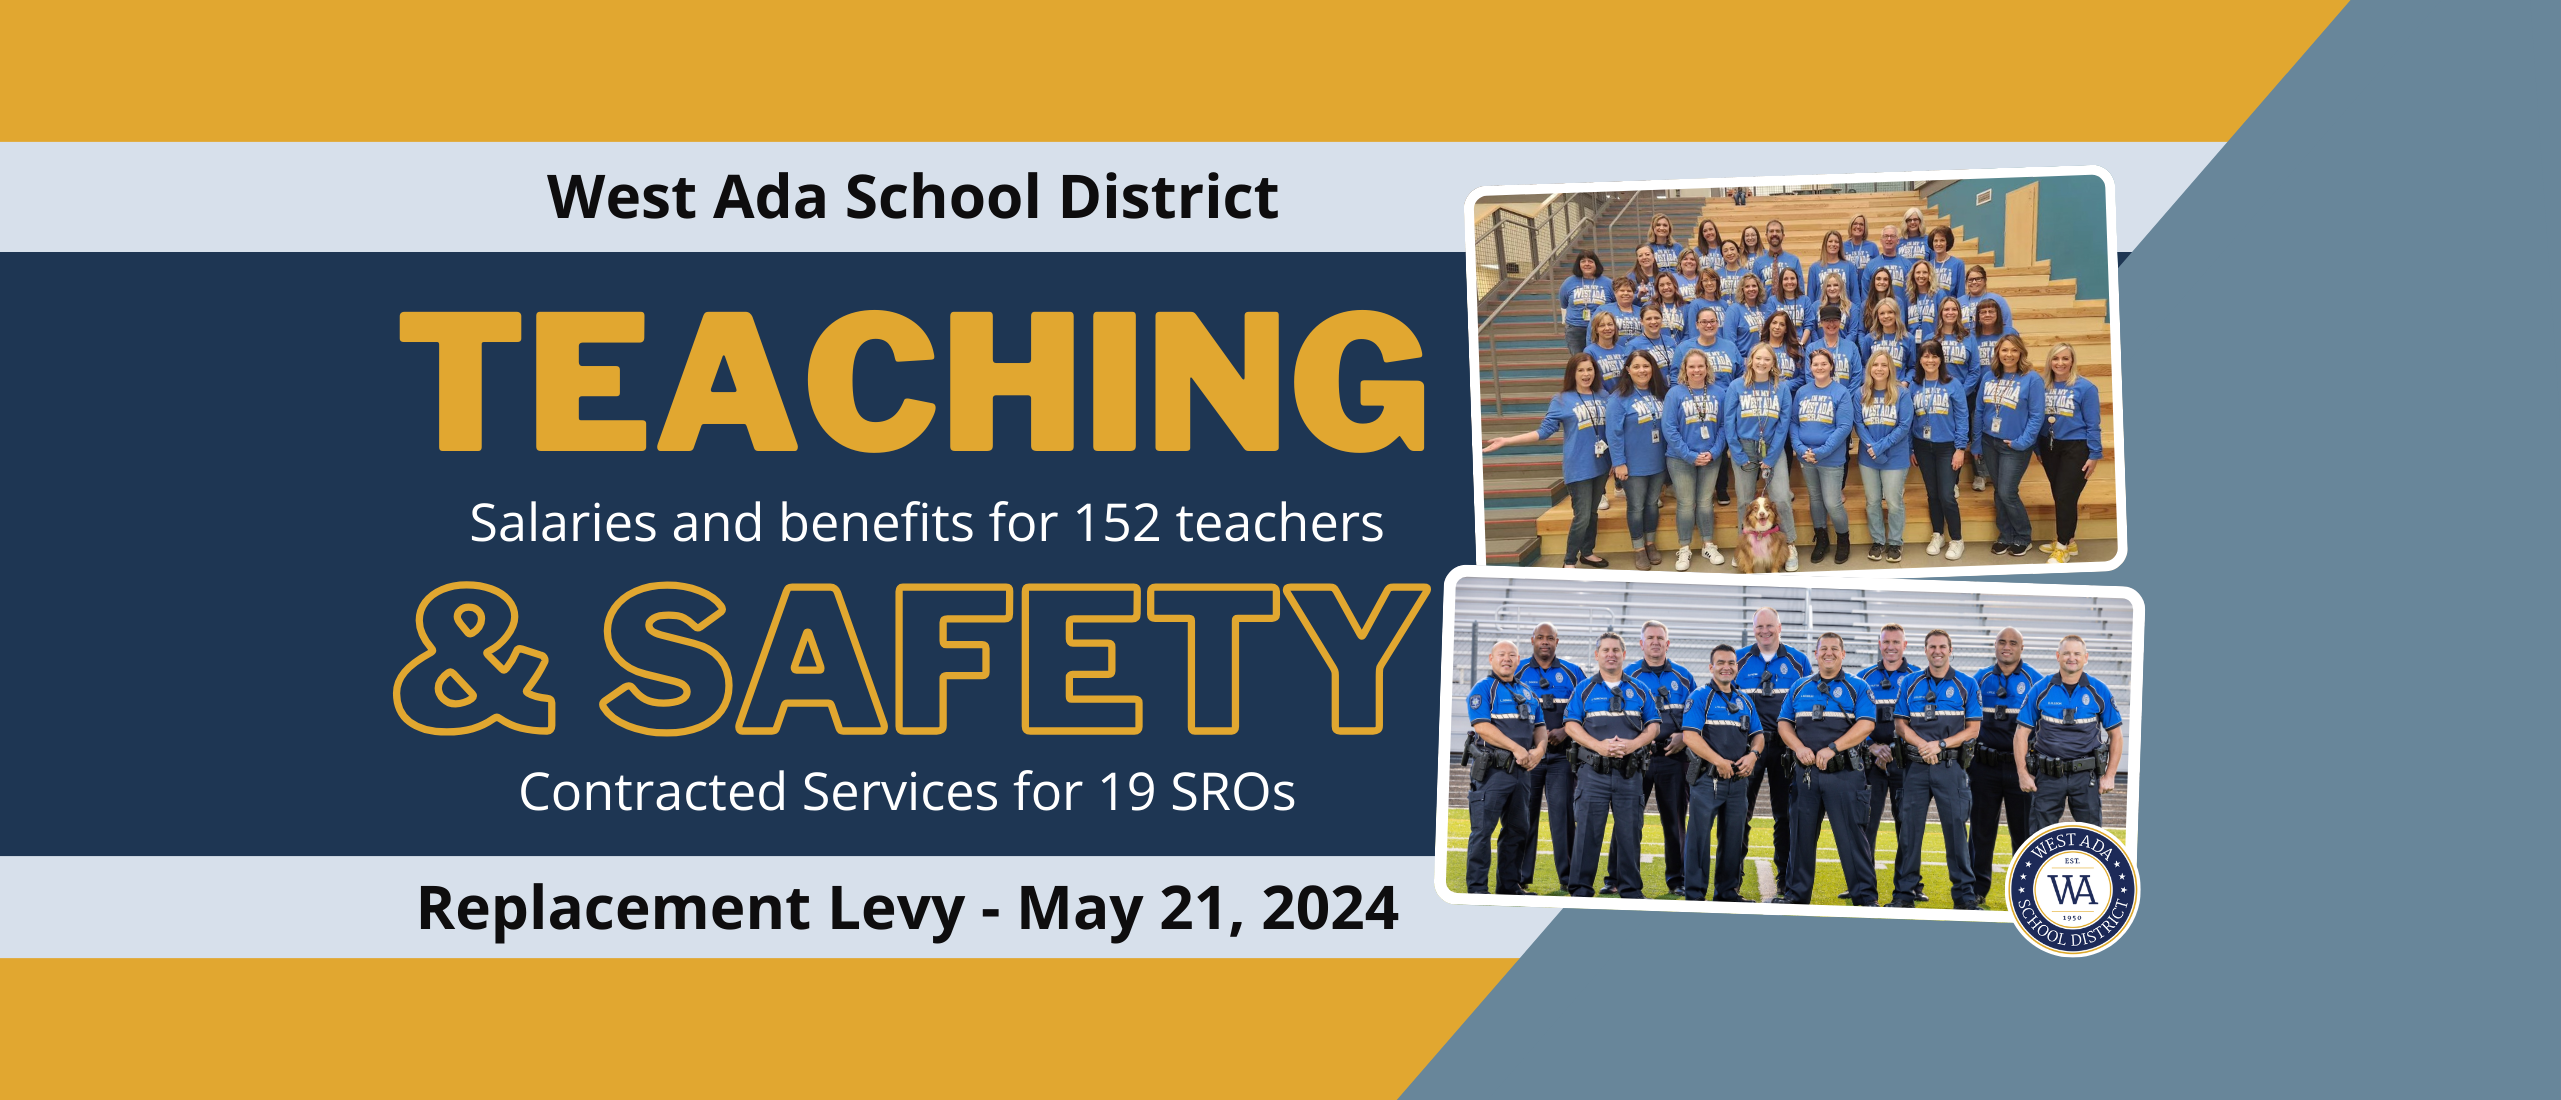 Replacement Levy 2024 Website Gallery image. Includes two photos: one of West Ada teachers, and one of West Ada SROs. Text on image reads: West Ada Replacement Levy - May 21, 2024 - Teaching & Safety - Salaries and benefits for 152 teachers - Contracted services for 19 SROs.